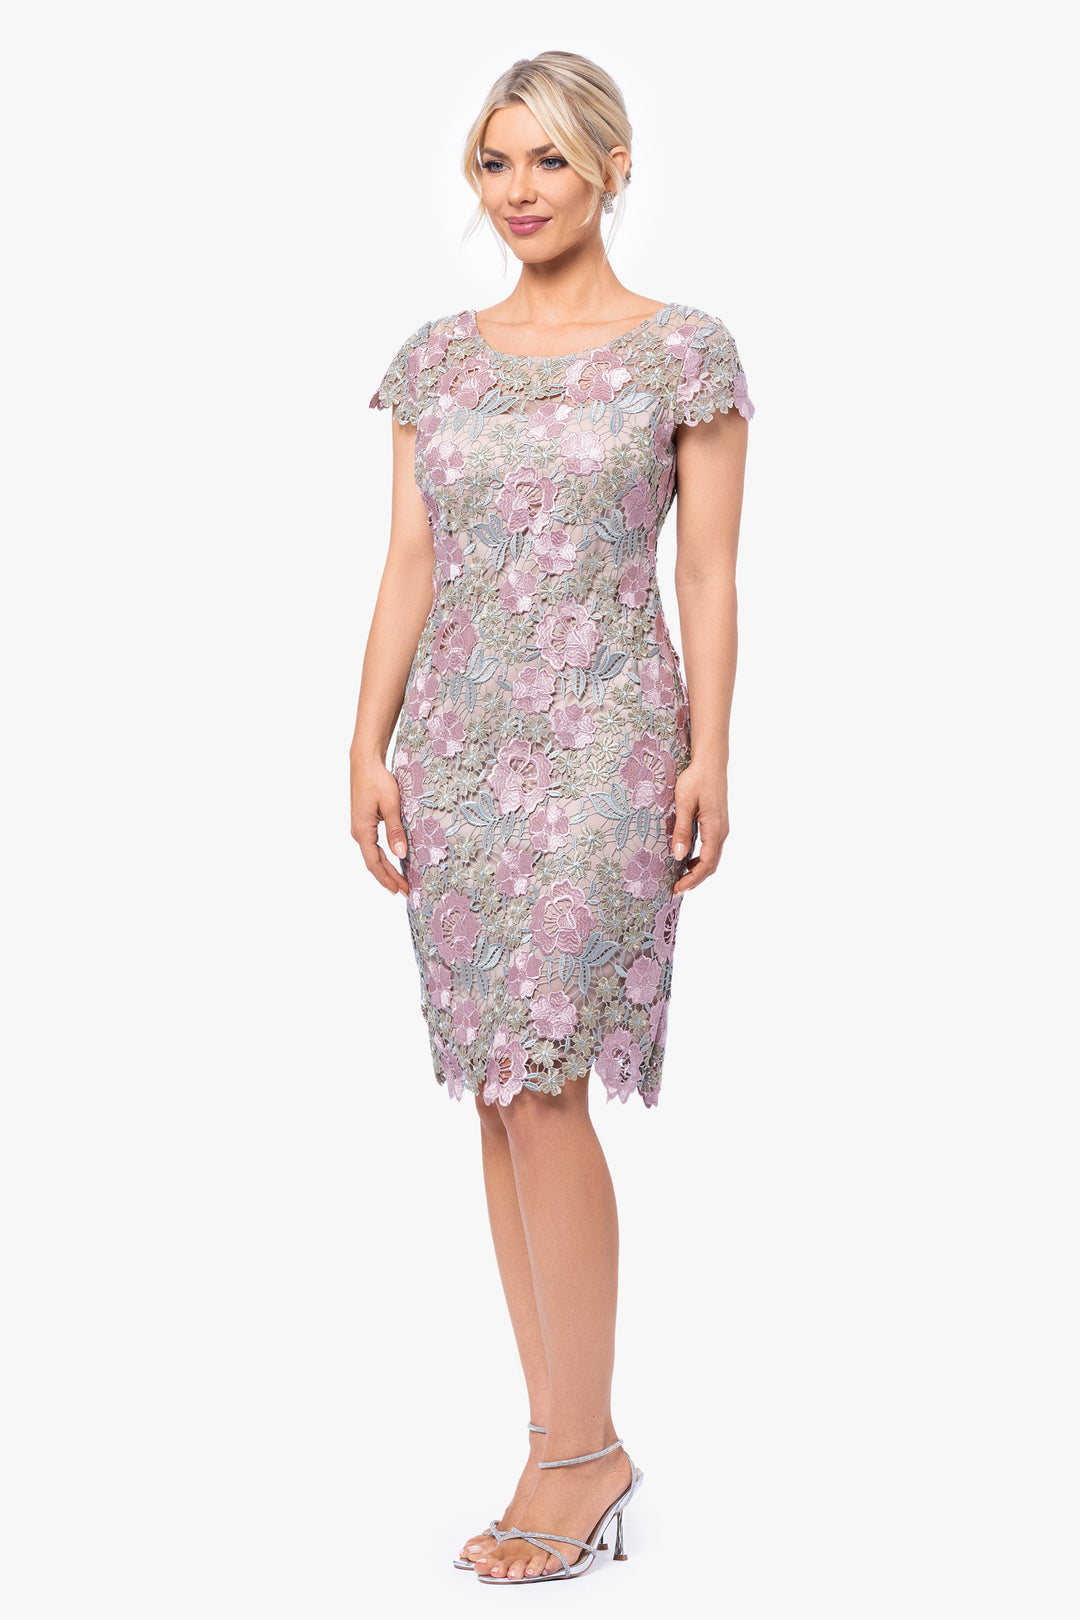 "Hattie" Short Sleeve Embroidered Lace Short Dress